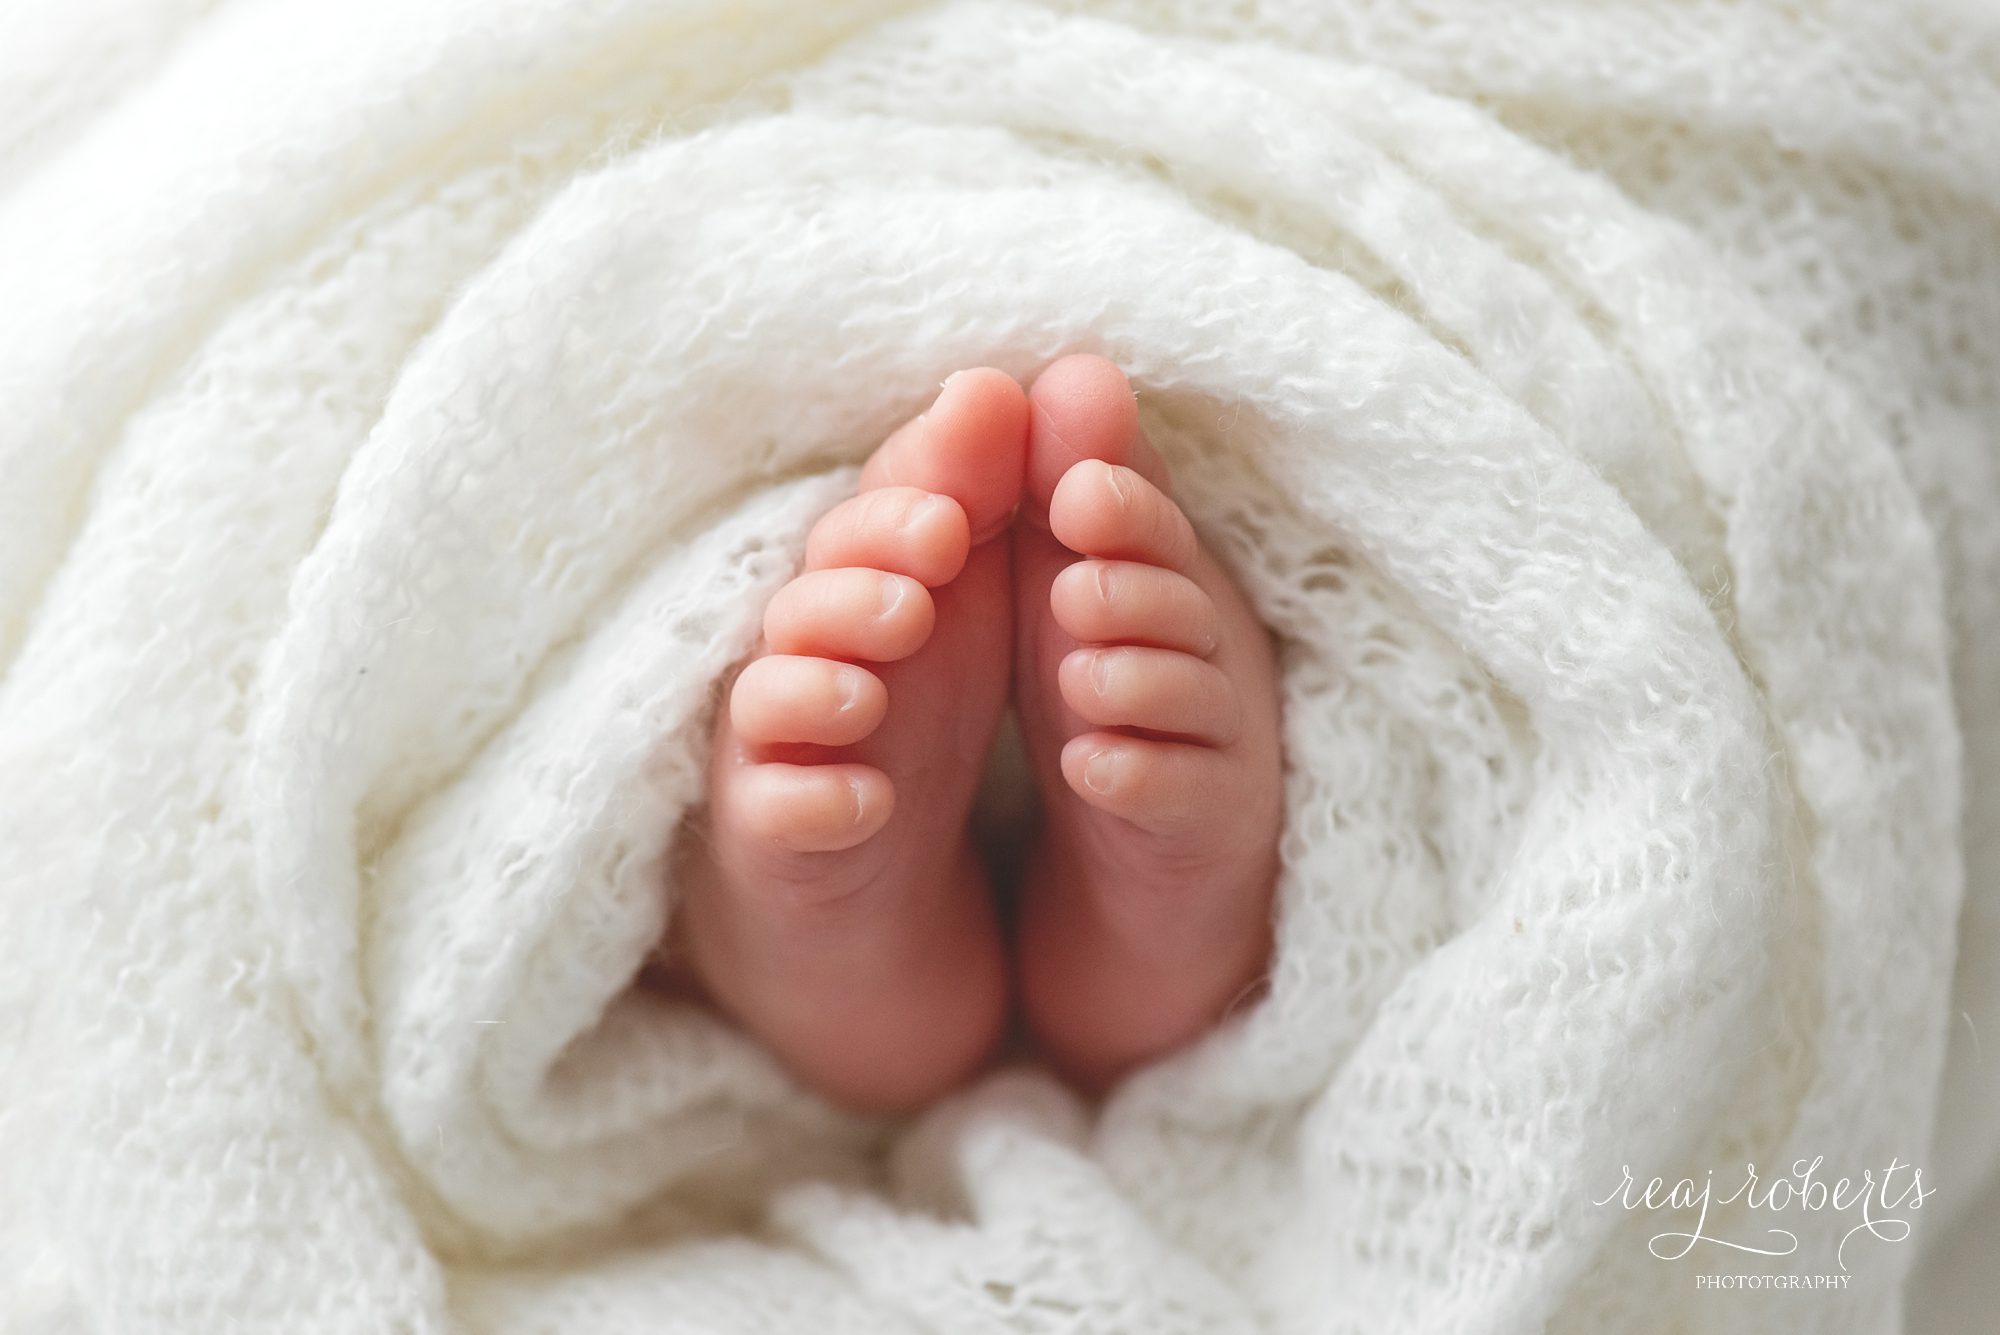 newborn baby toes tiny details | Reaj Roberts Photography